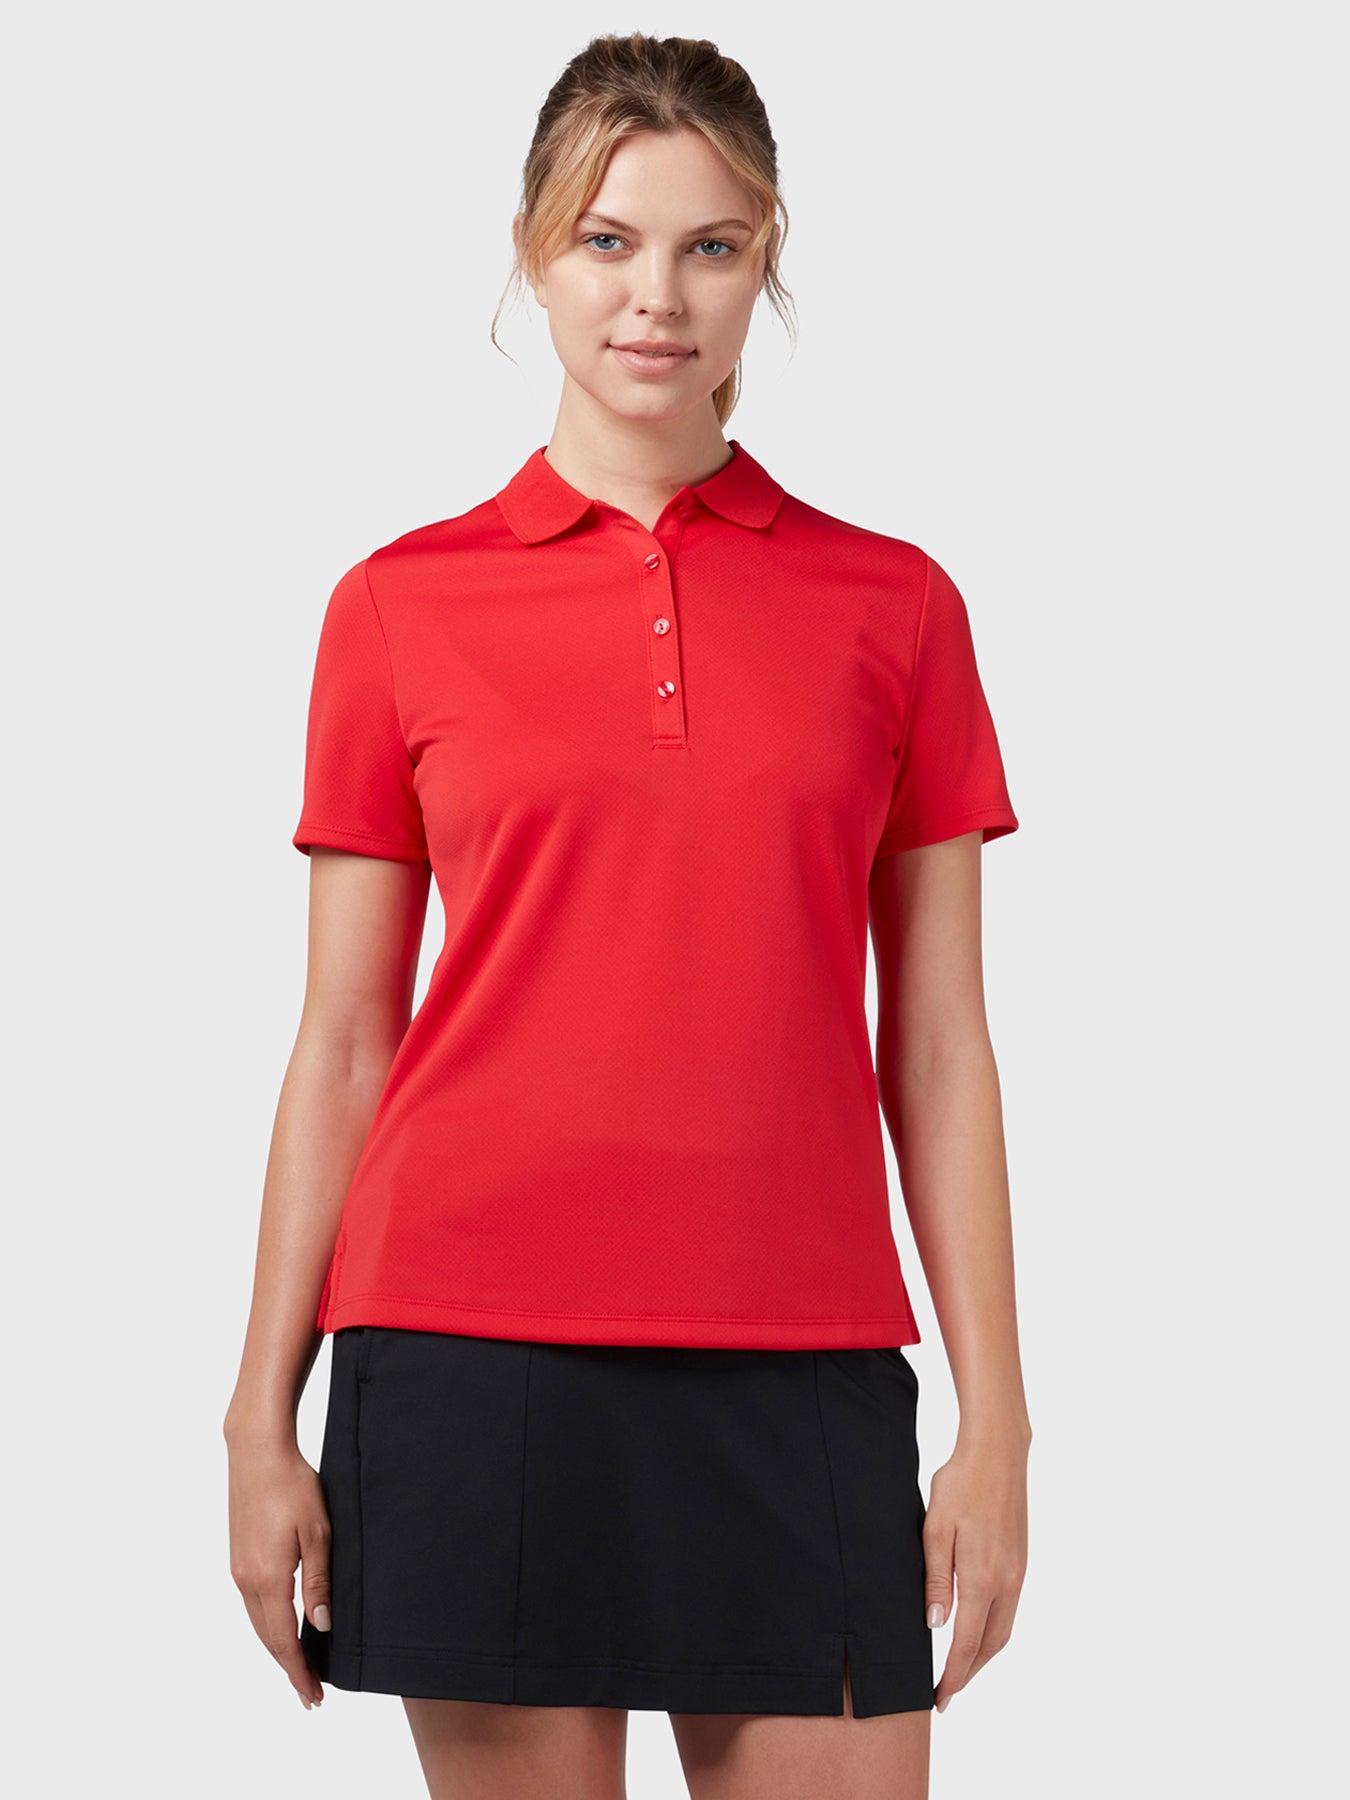 View Swing Tech Womens Polo In True Red True Red S information